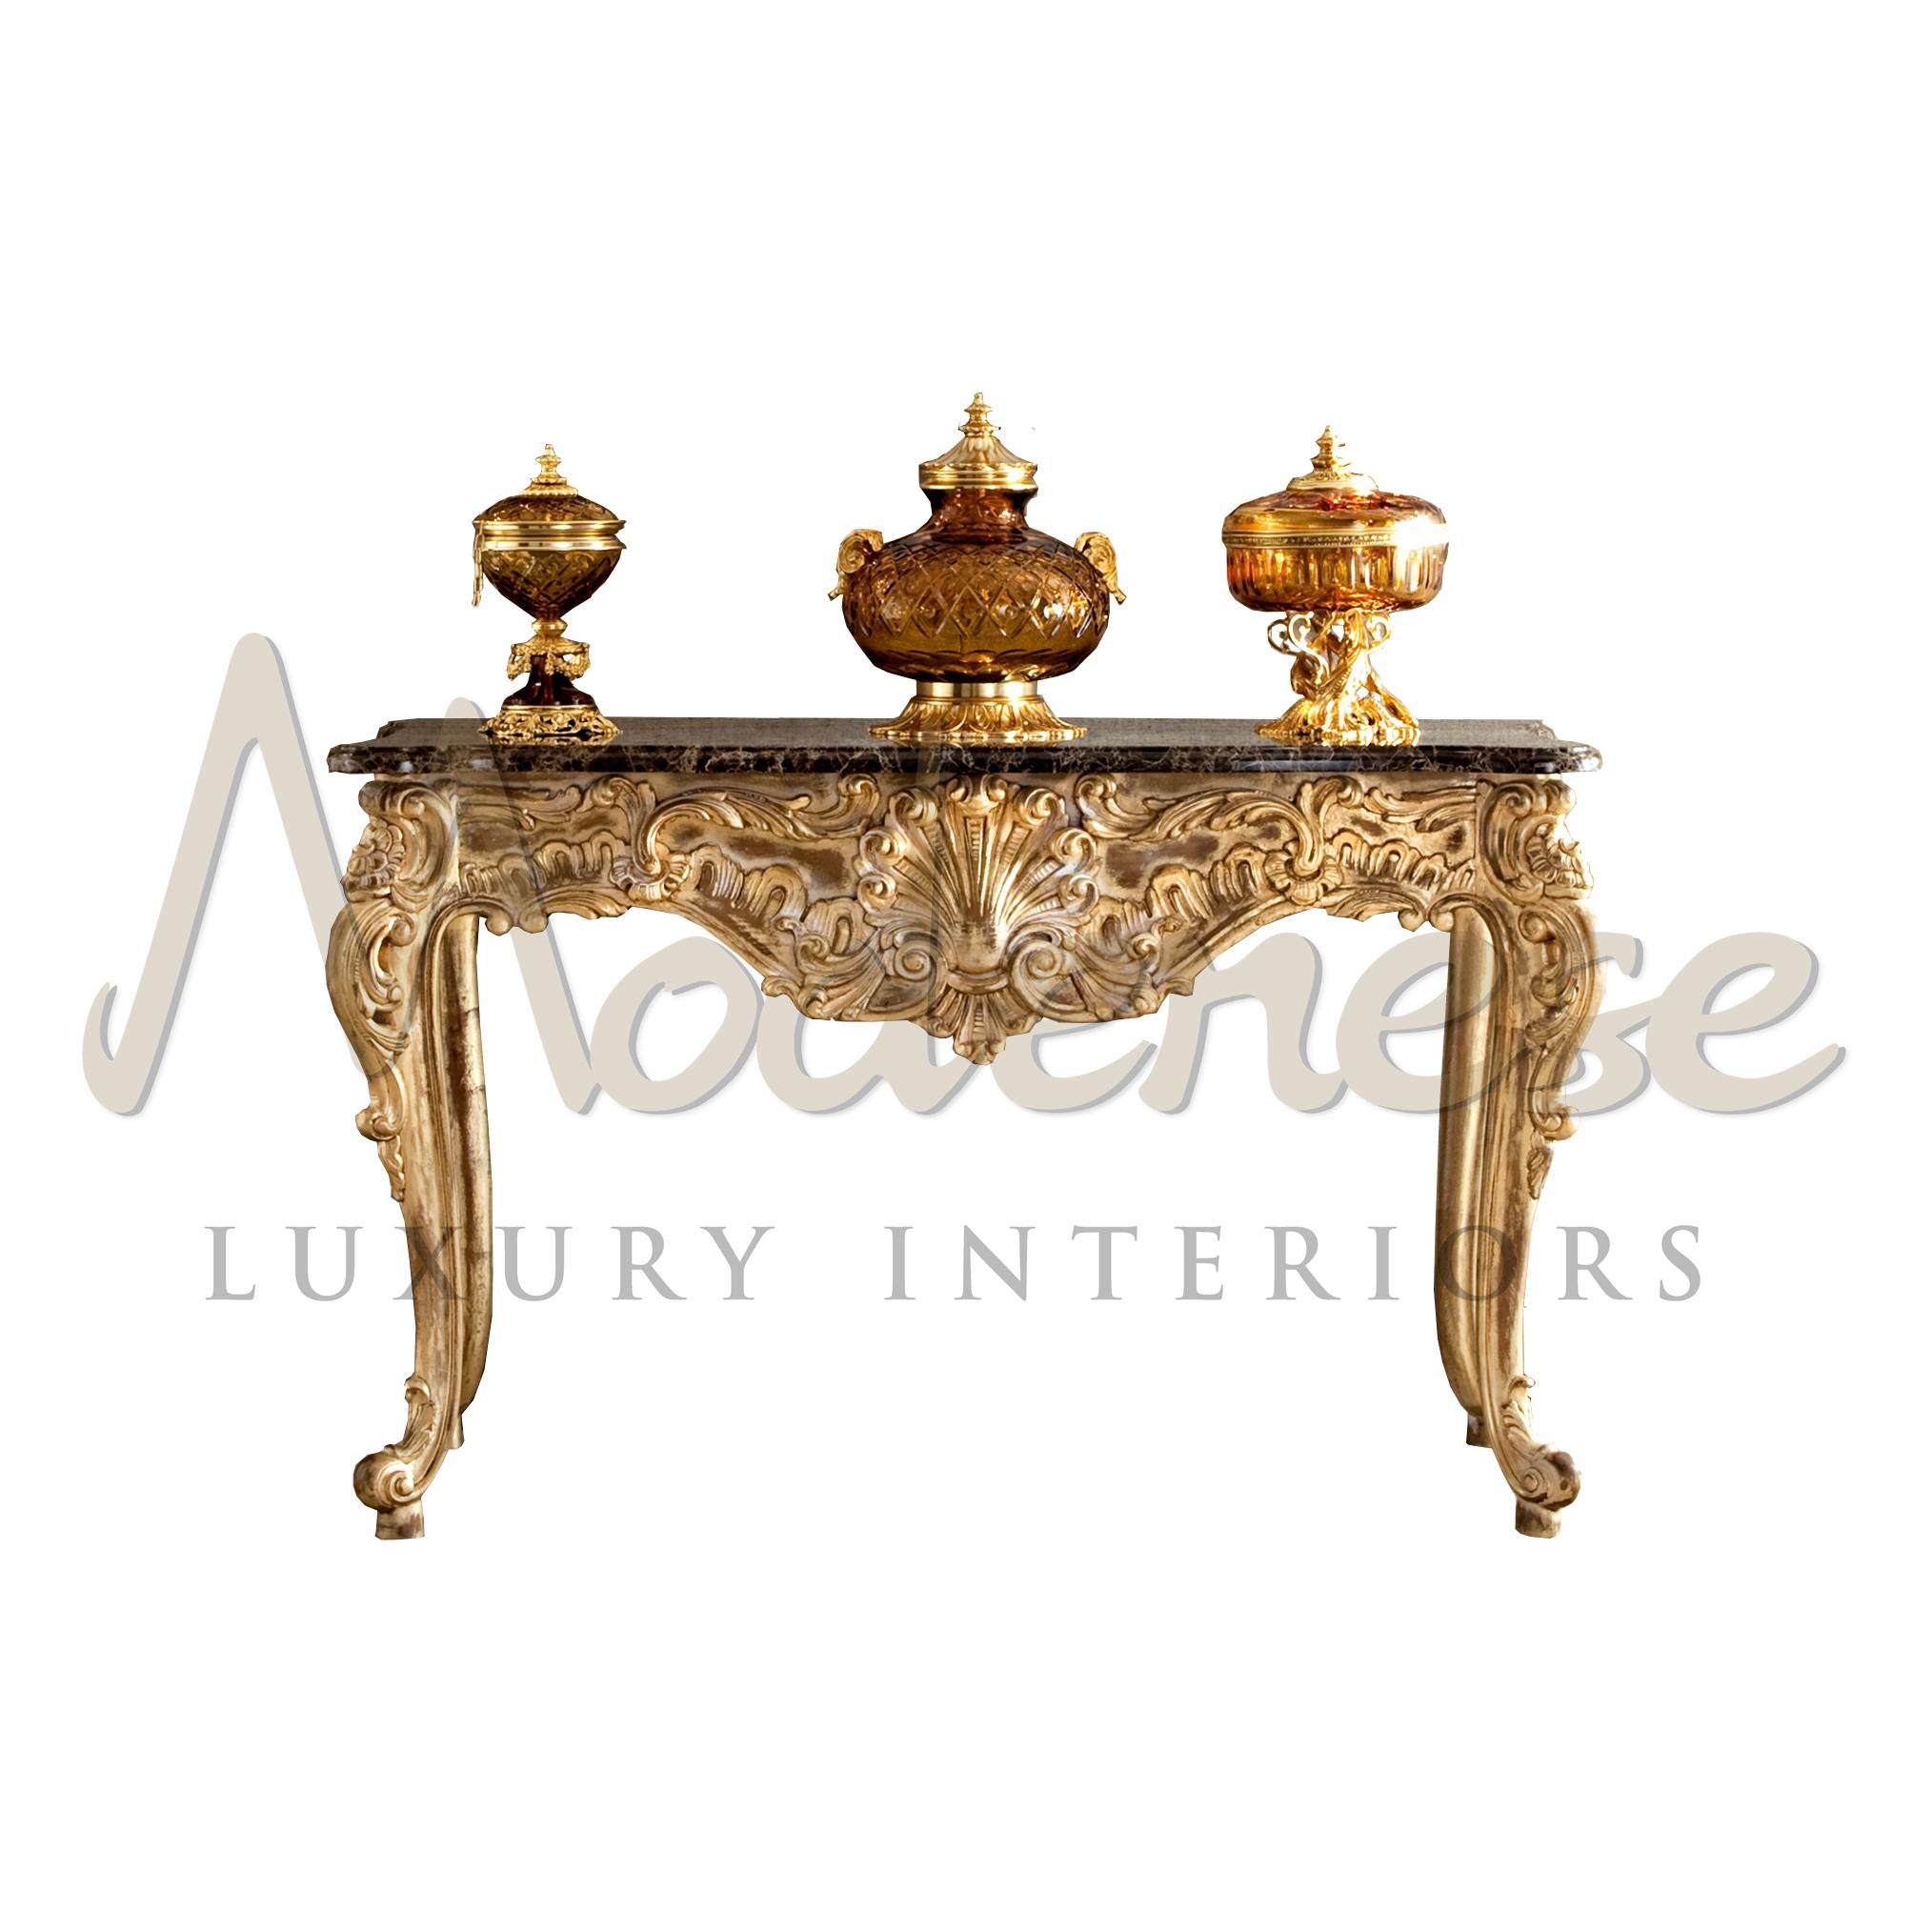 This baroque-style console is one of Modenese Luxury Interiors' masterpieces.
The baroque shape of the whole structure highlights our artisans' focus on hand-carving woodworking, which has been carried on from father to son. At second sight, one